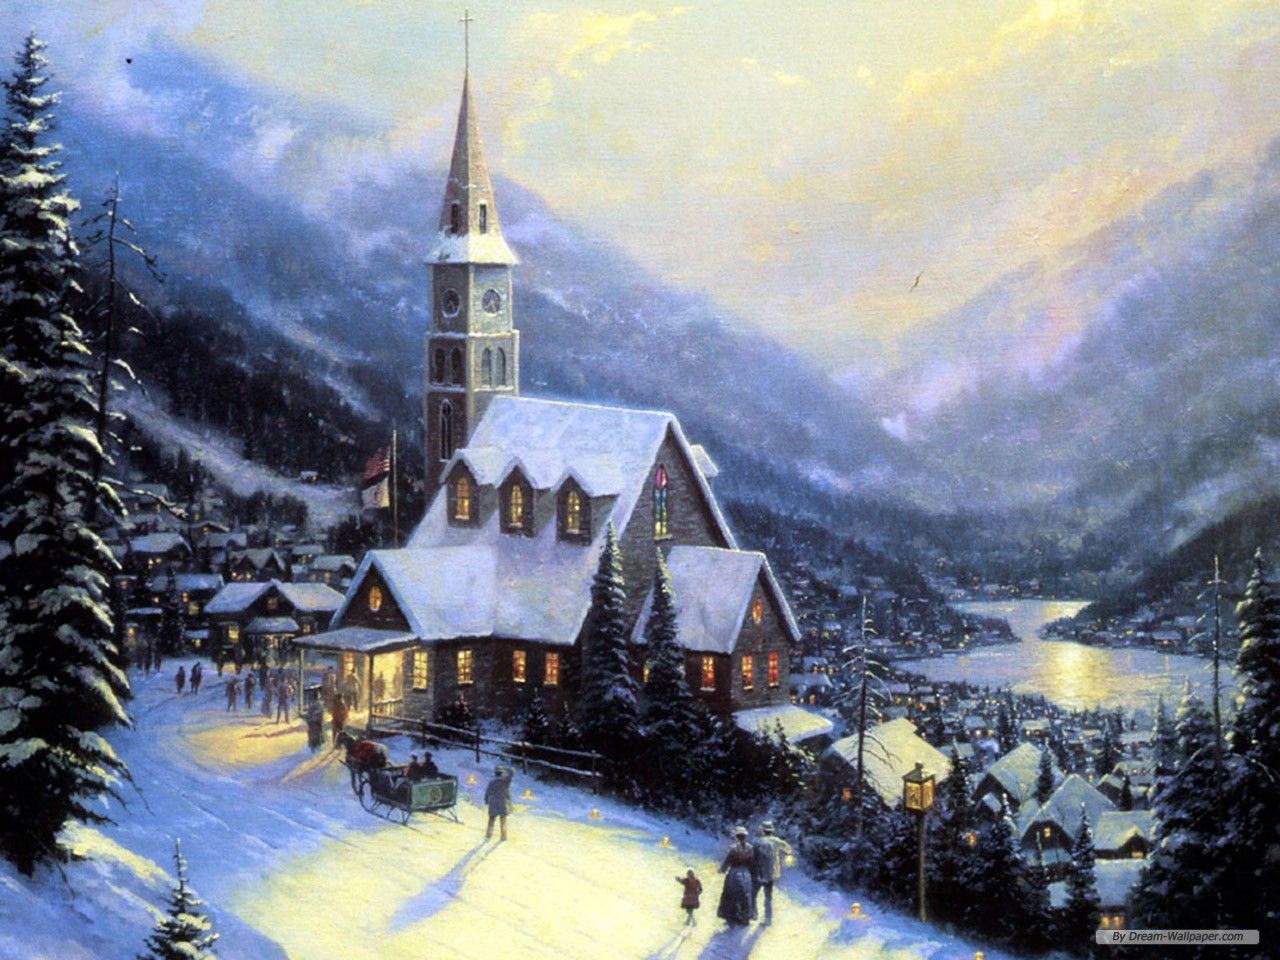 Free download Wallpaper Holiday wallpaper Christmas Eve Painting wallpaper [1280x960] for your Desktop, Mobile & Tablet. Explore Christmas Paintings Wallpaper Picture. Free Christmas Wallpaper, Christmas Desktop Free Holiday Wallpaper